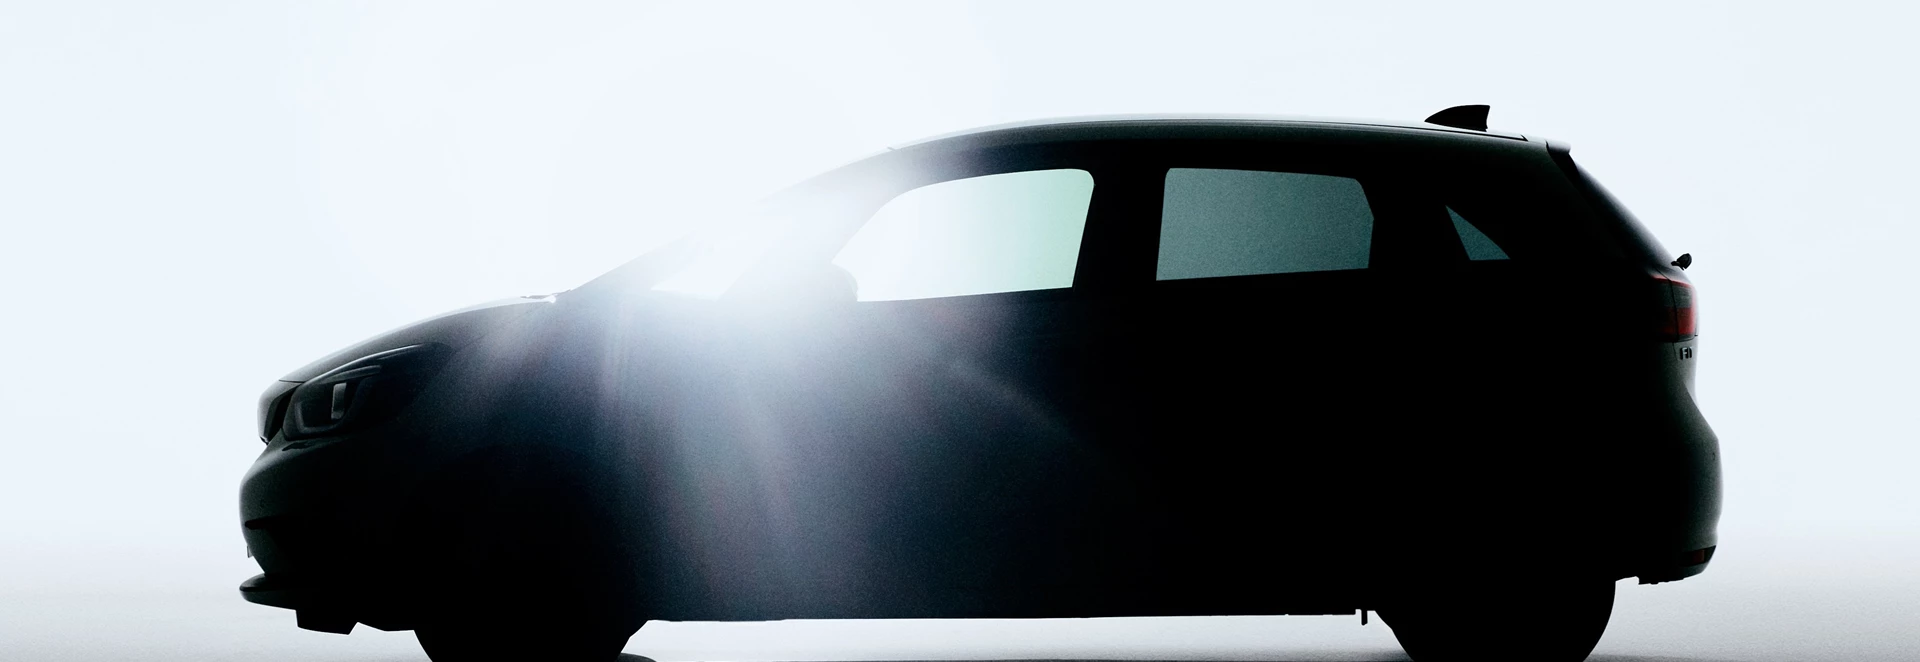 Honda teases new Jazz ahead of debut later this month 